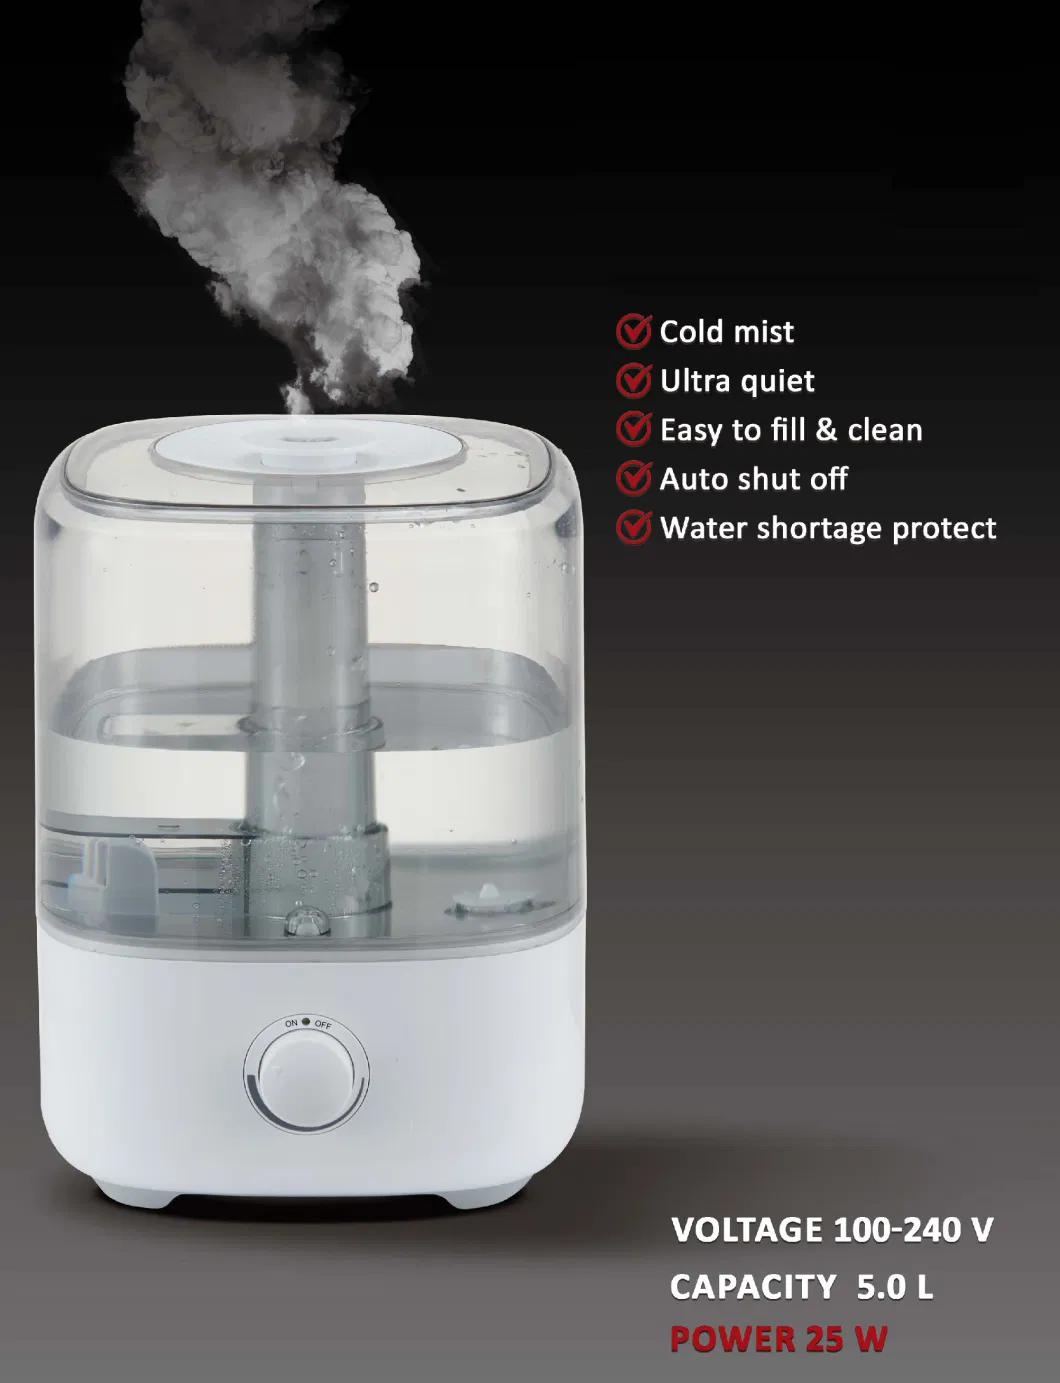 Desktop LED Home Room Aroma Cool Mist Essential Oil Diffuser H2O Ultrasonic Air Humidifier